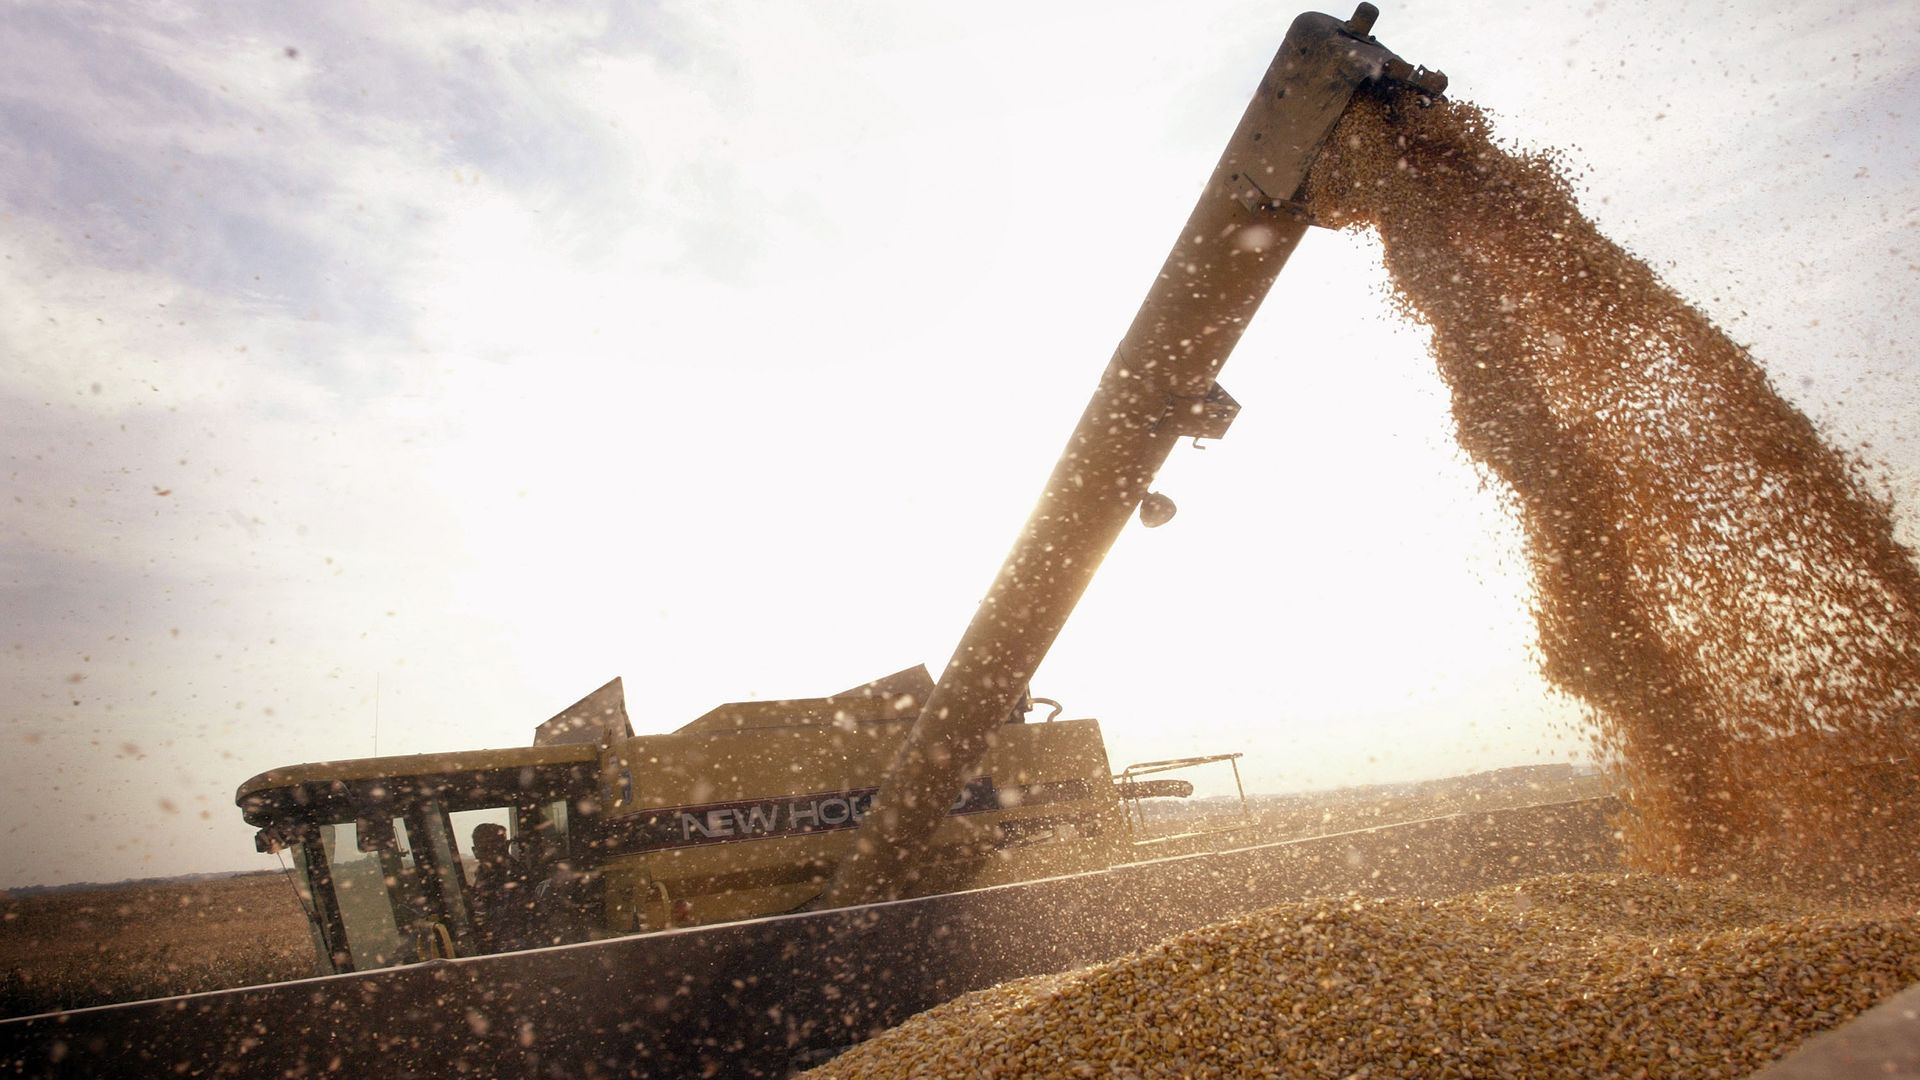 John Shedd, 85, loads a container with Bt-corn harvested from his son's farm October 9, 2003 near Rockton, Illinois.